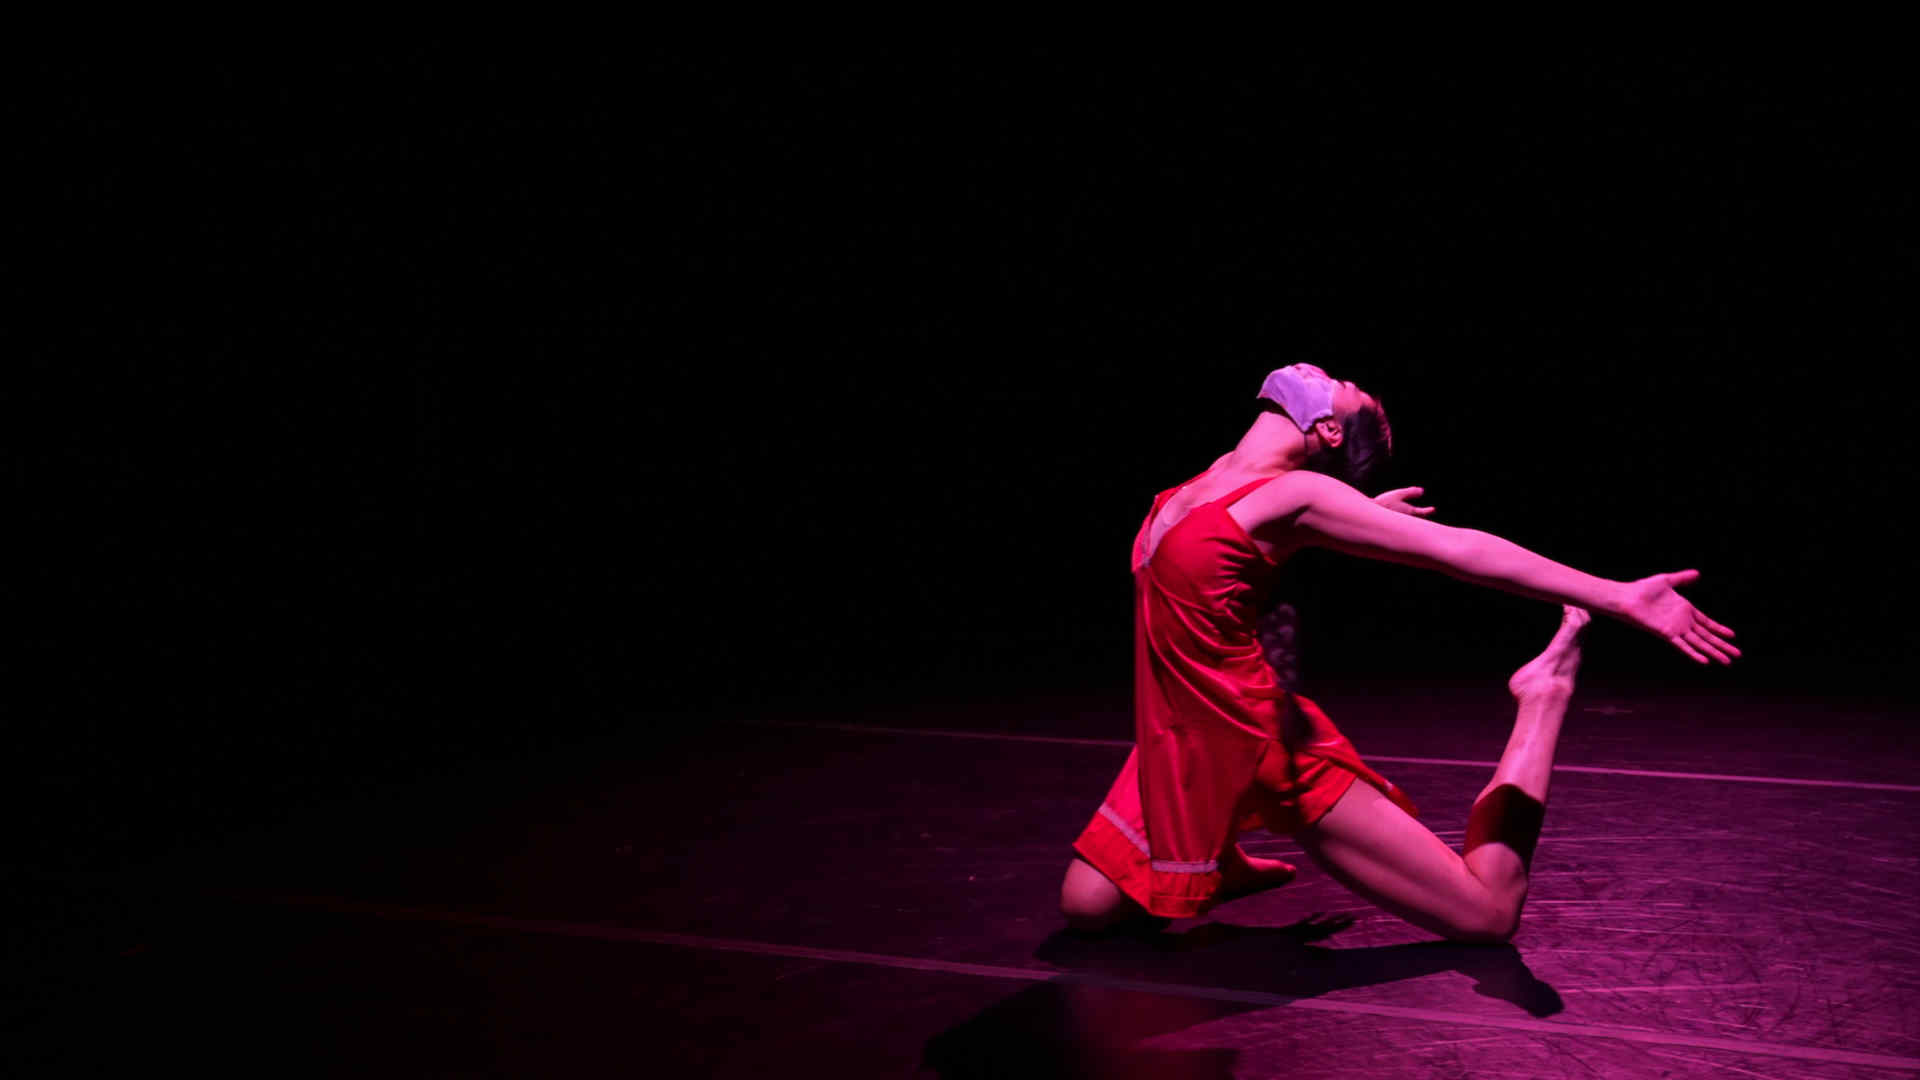 A dancer performing, costumed in a red dress in a kneeling pose with arms extended behind her